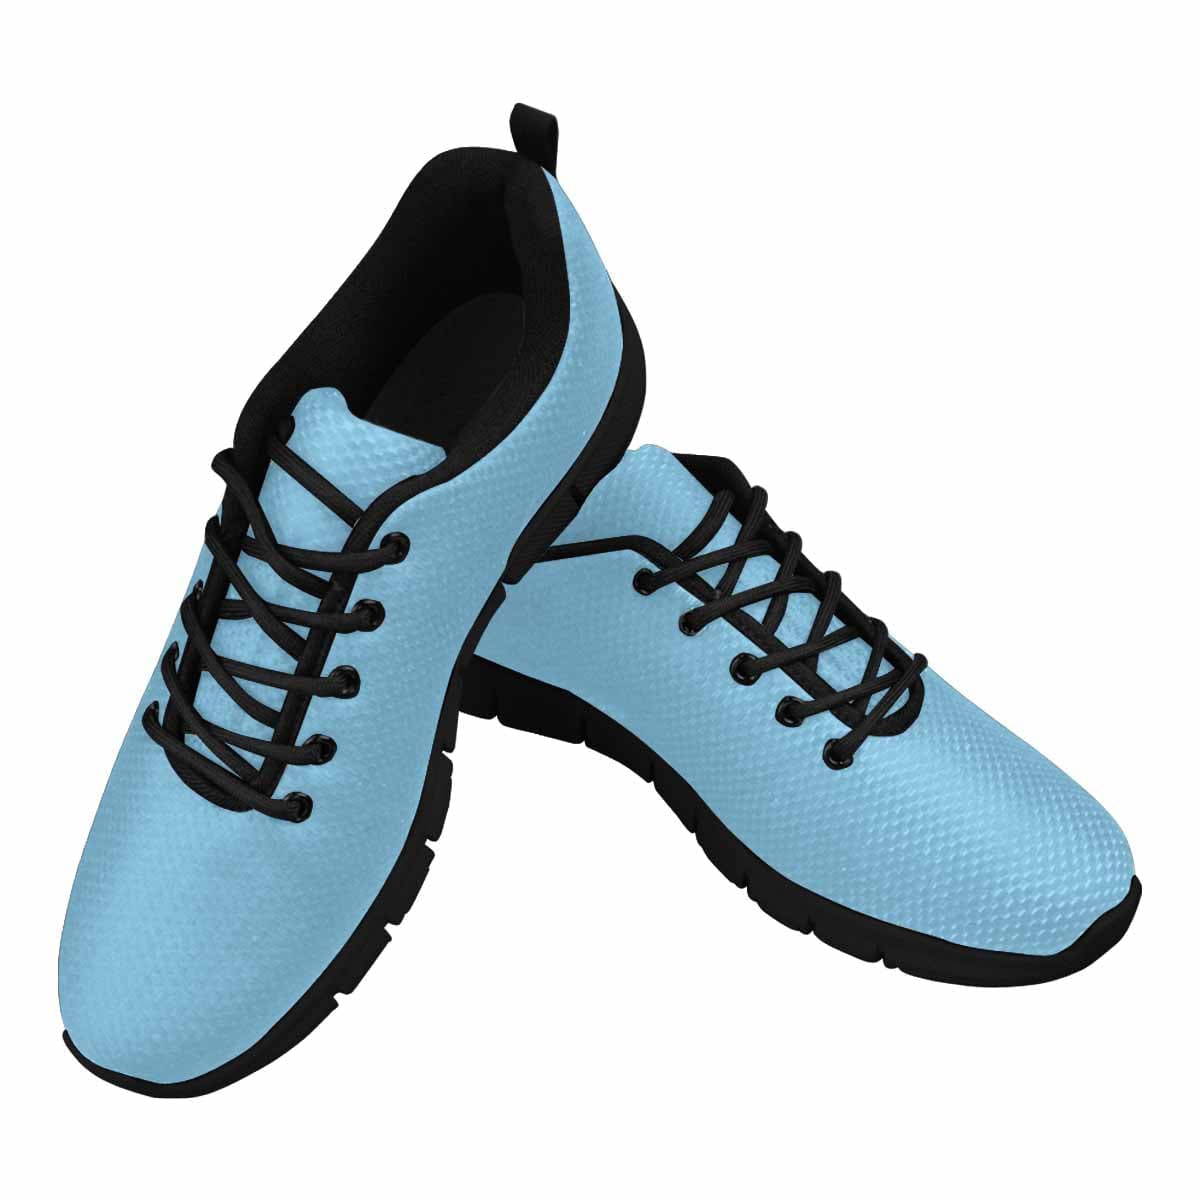 Sneakers For Men Light Blue - Canvas Mesh Athletic Running Shoes - Mens